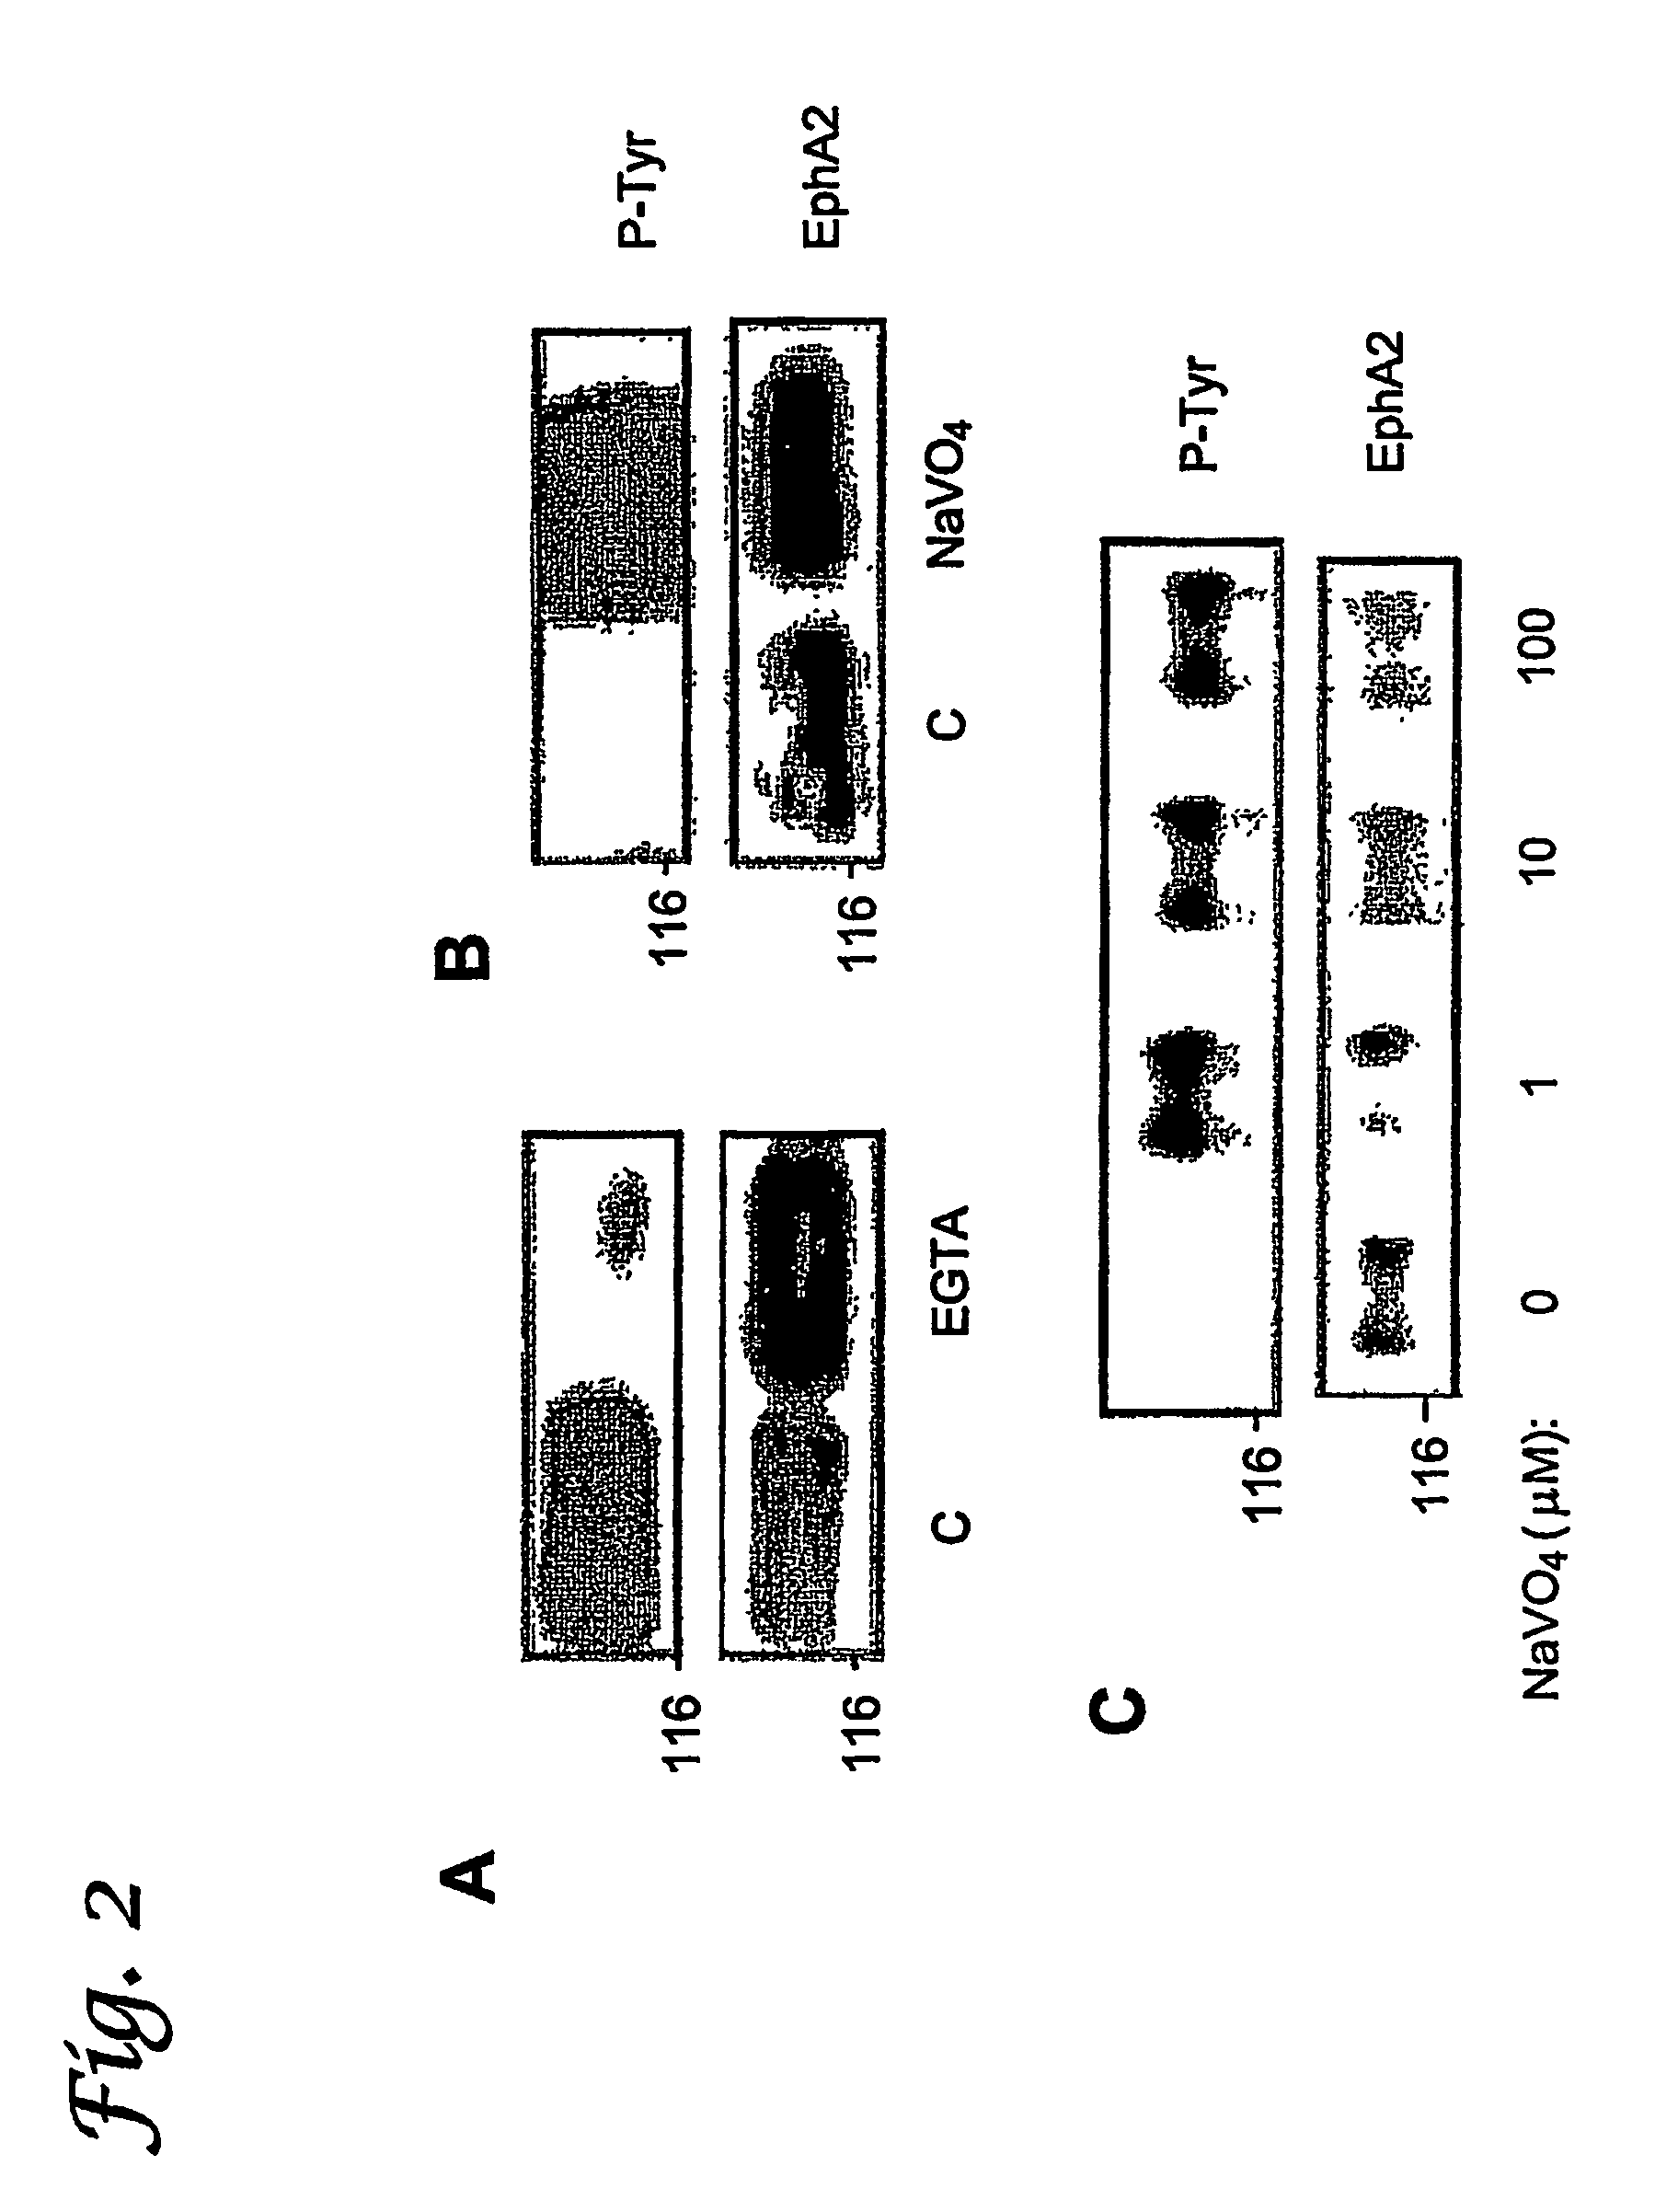 Low molecular weight protein tyrosine phosphatase (LMW-PTP) as a diagnostic and therapeutic target